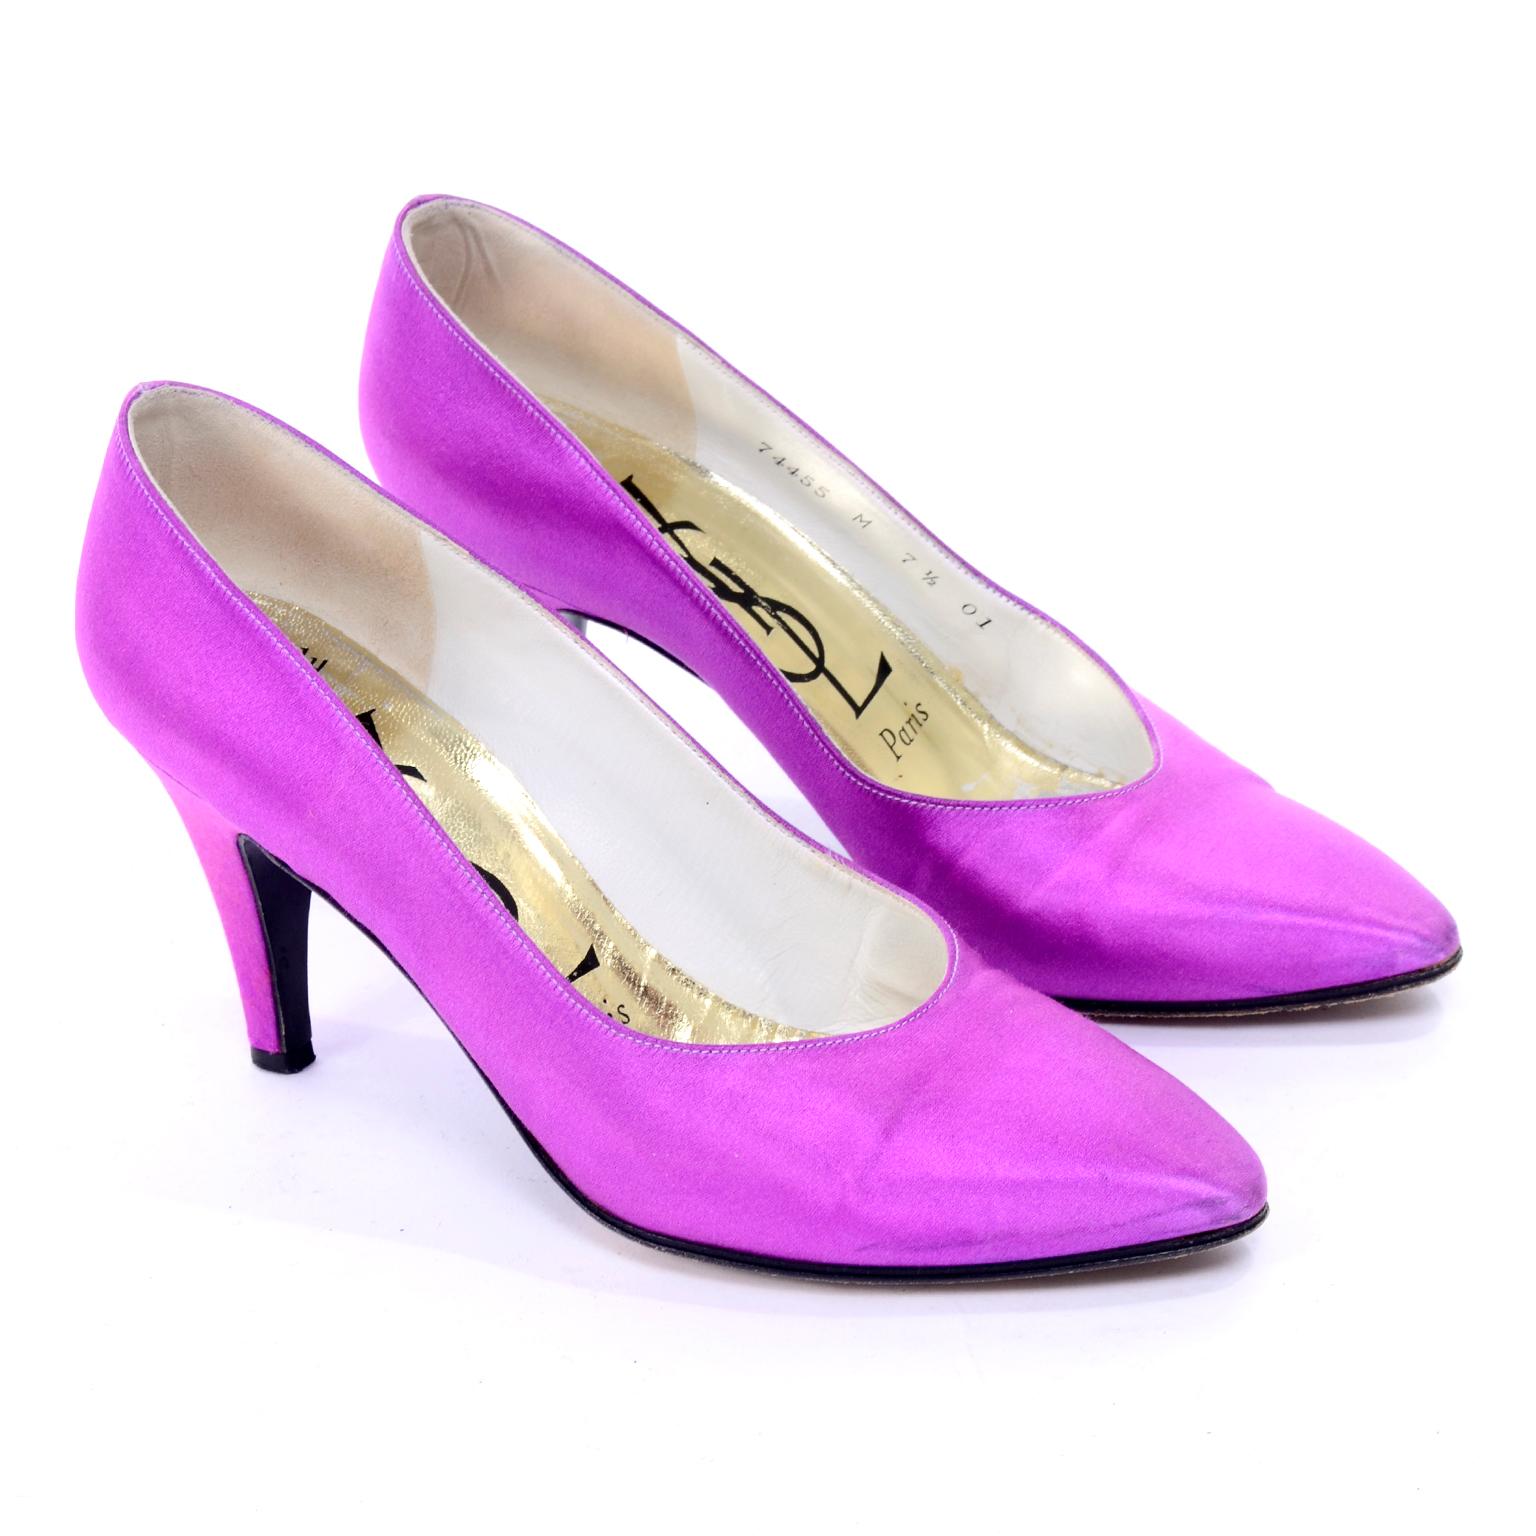 These are very pretty vintage shoes from Yves Saint Laurent. These purple satin YSL pumps have 3 and 1.4